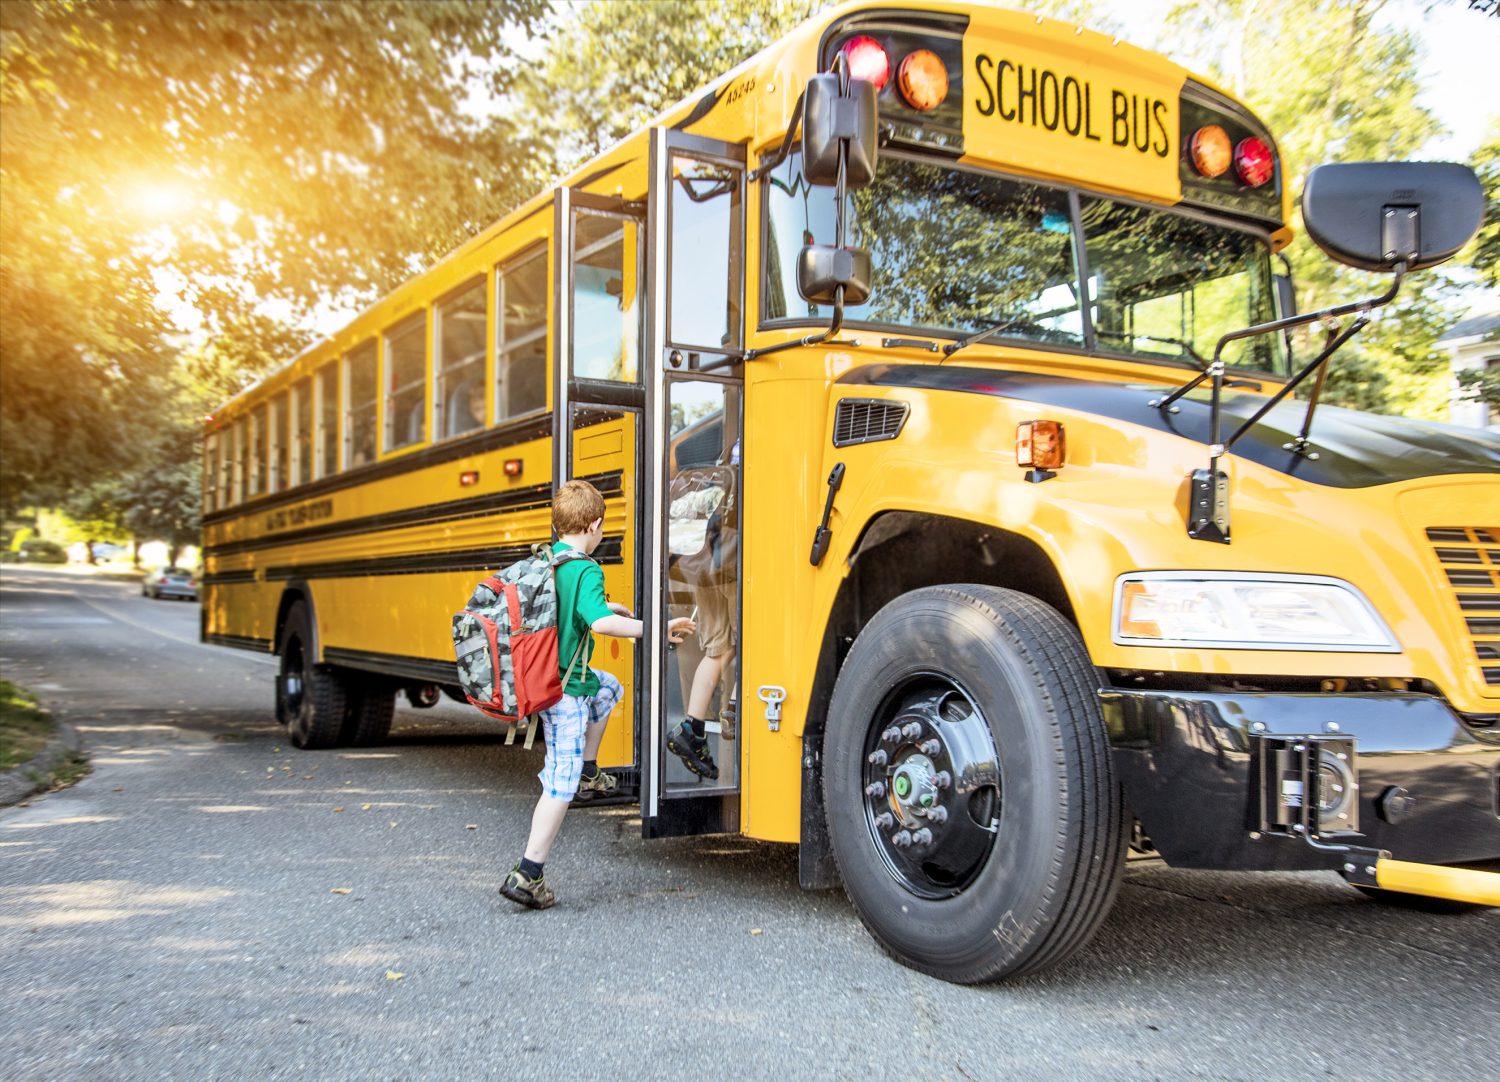 Touching Photo Of Bus Driver Holding Boy's Hand On First Day Of School Goes Viral